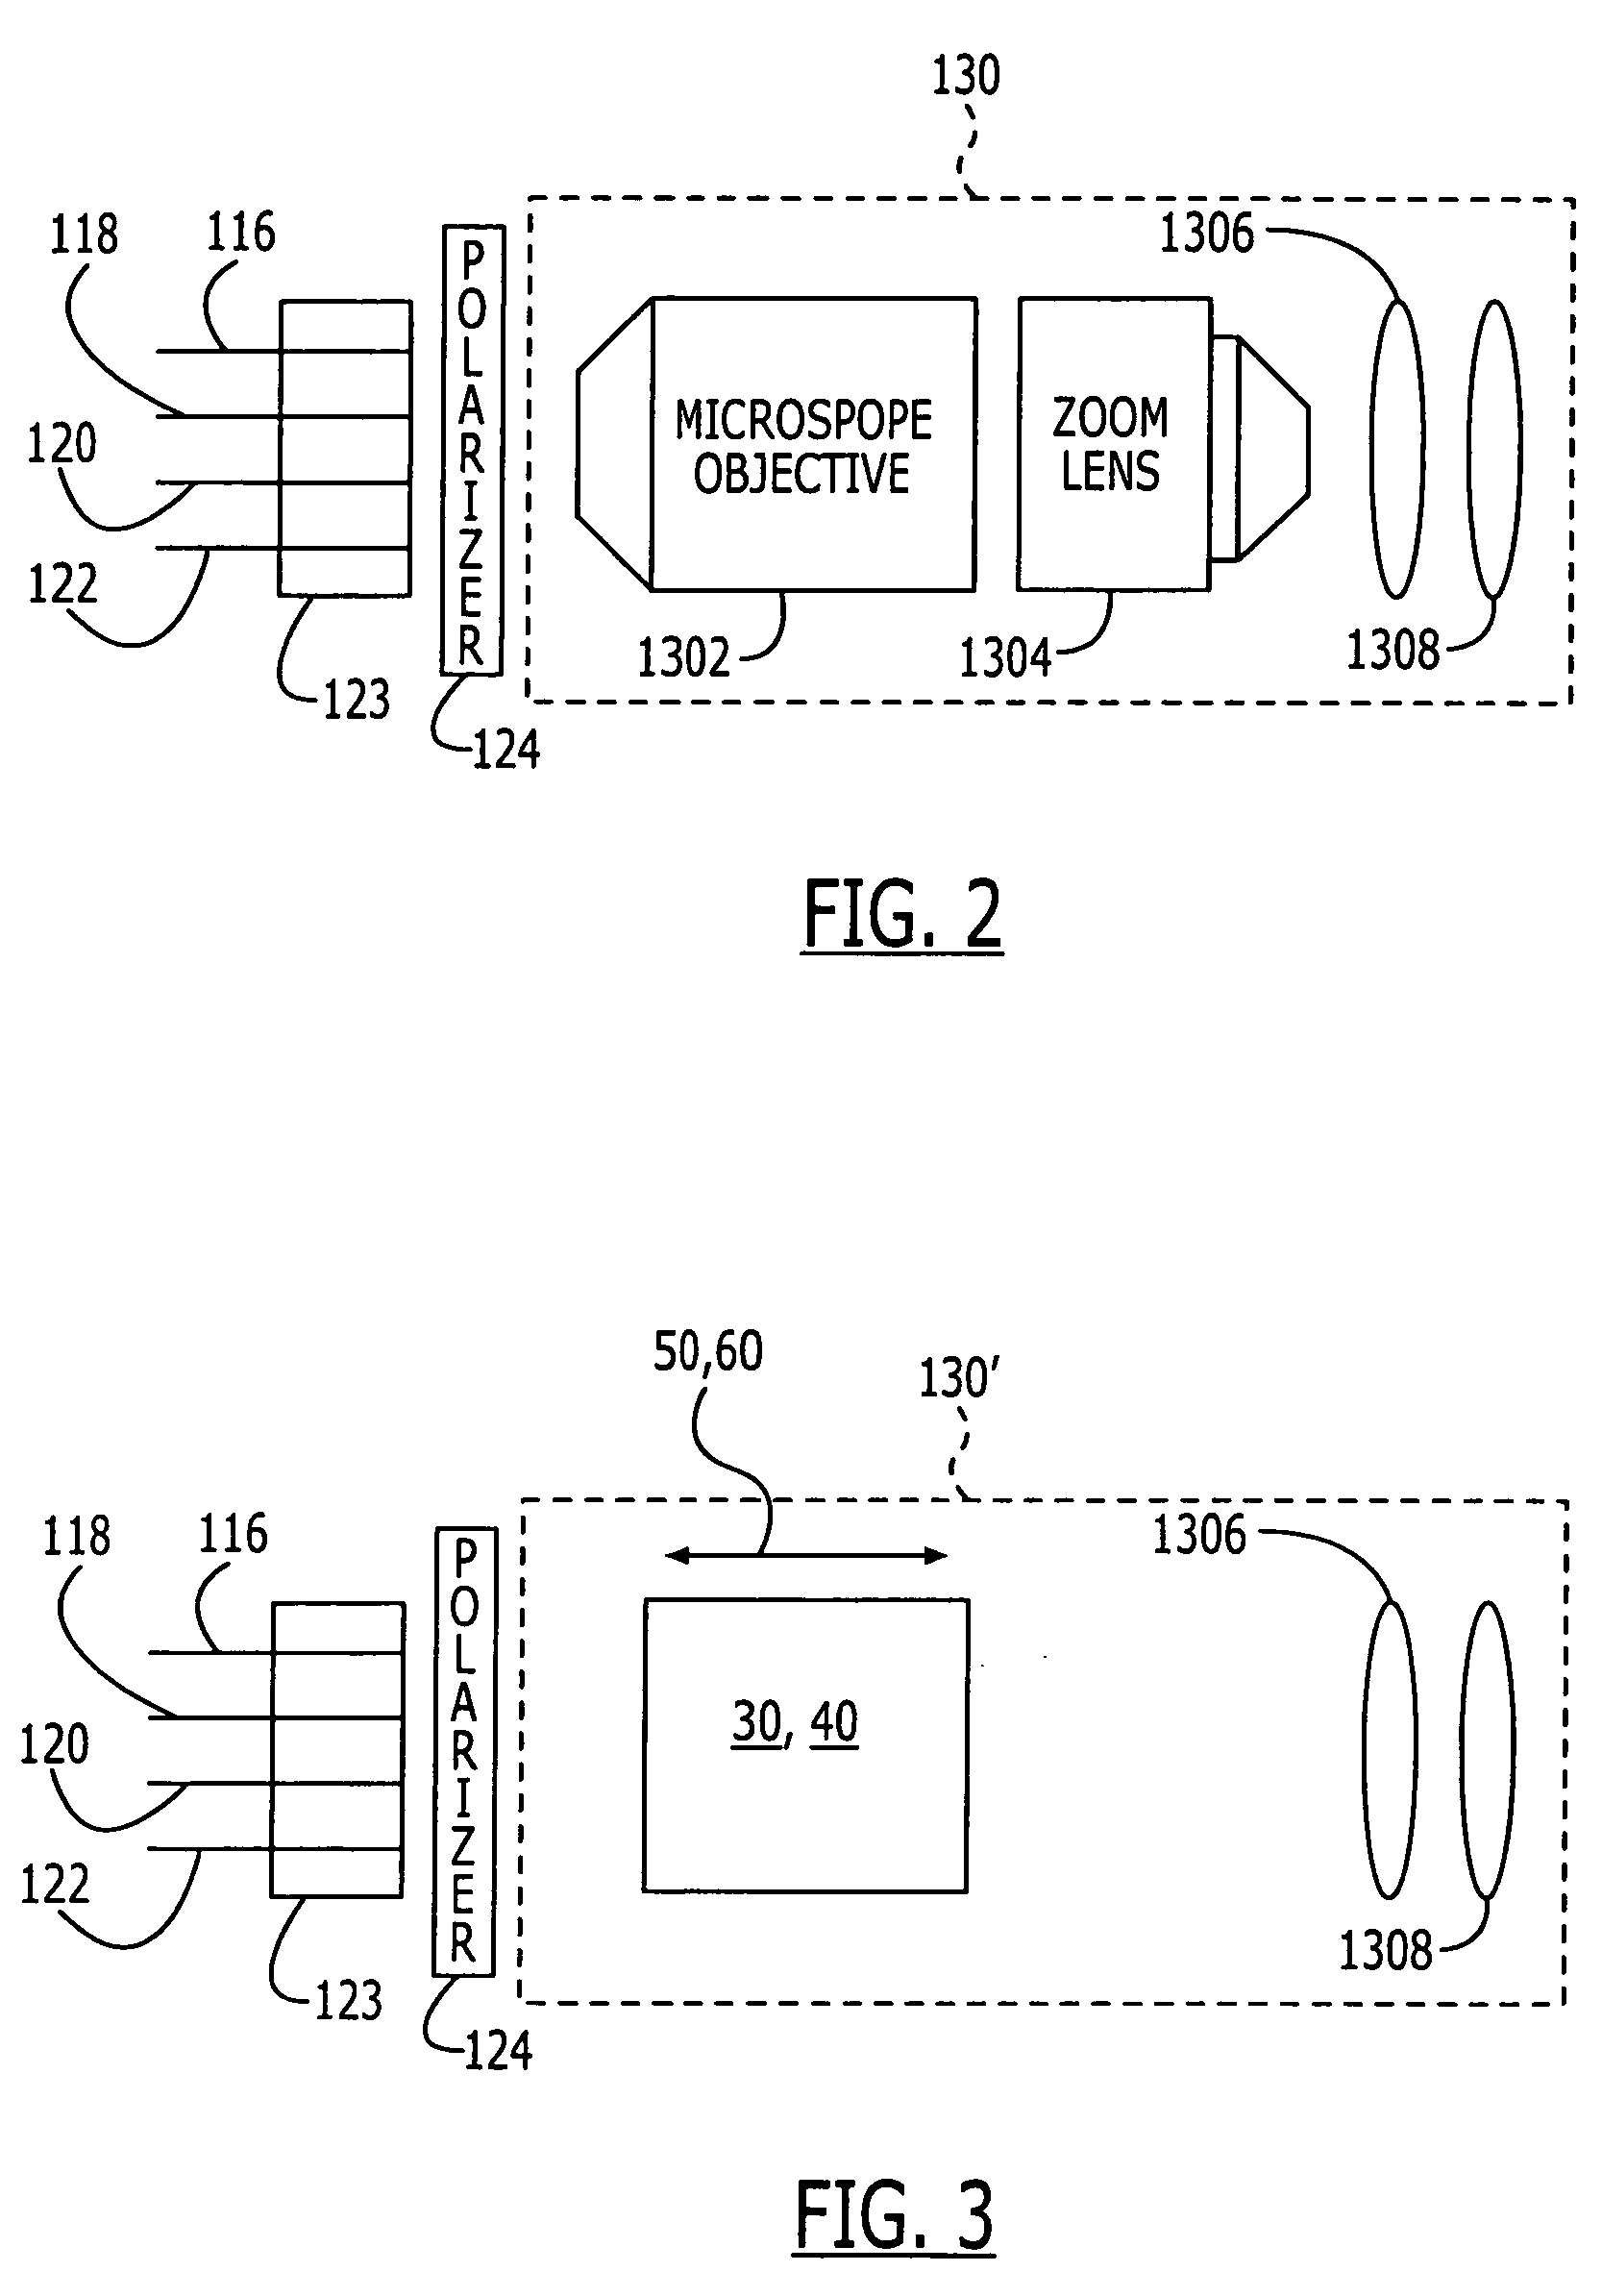 Eye tracker and pupil characteristic measurement system and associated methods